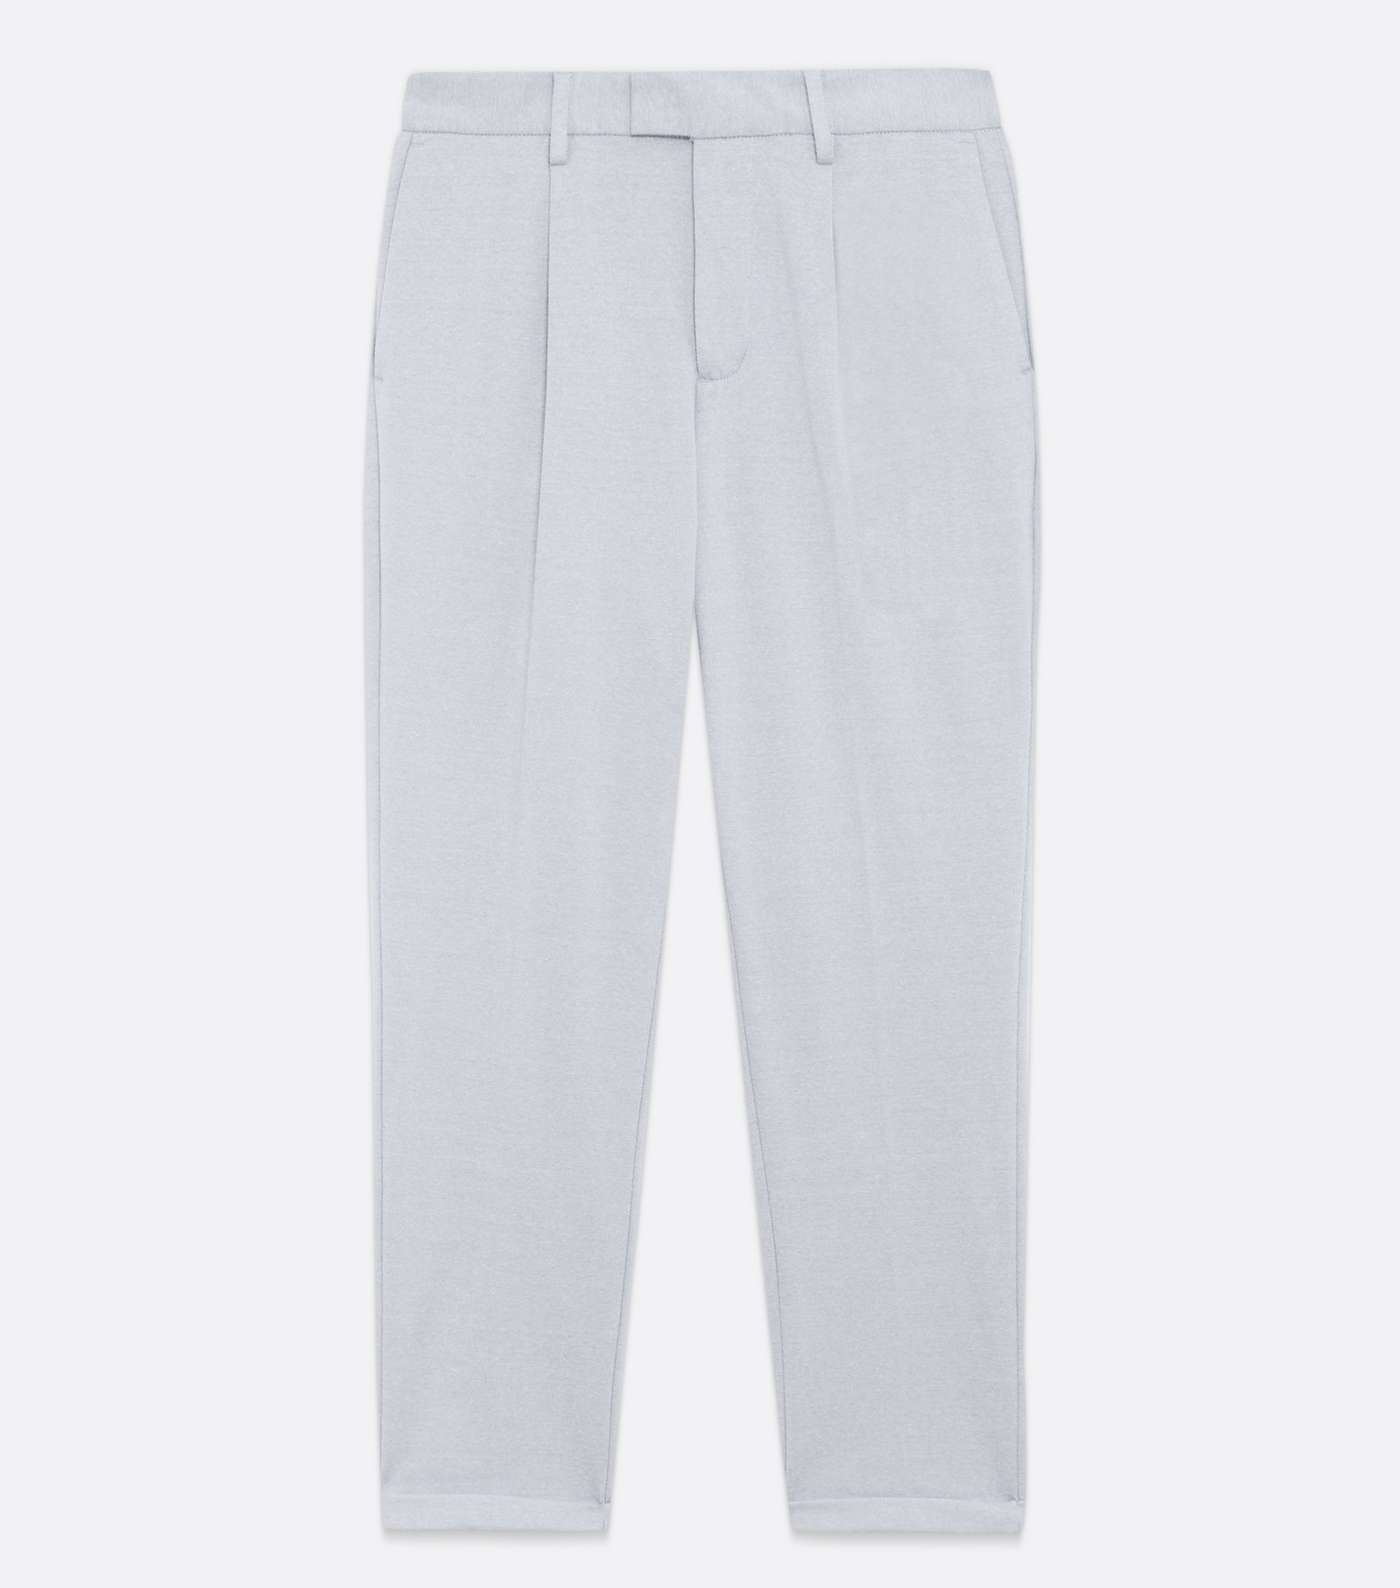 Pale Grey Cuffed Slim Fit Trousers Image 5